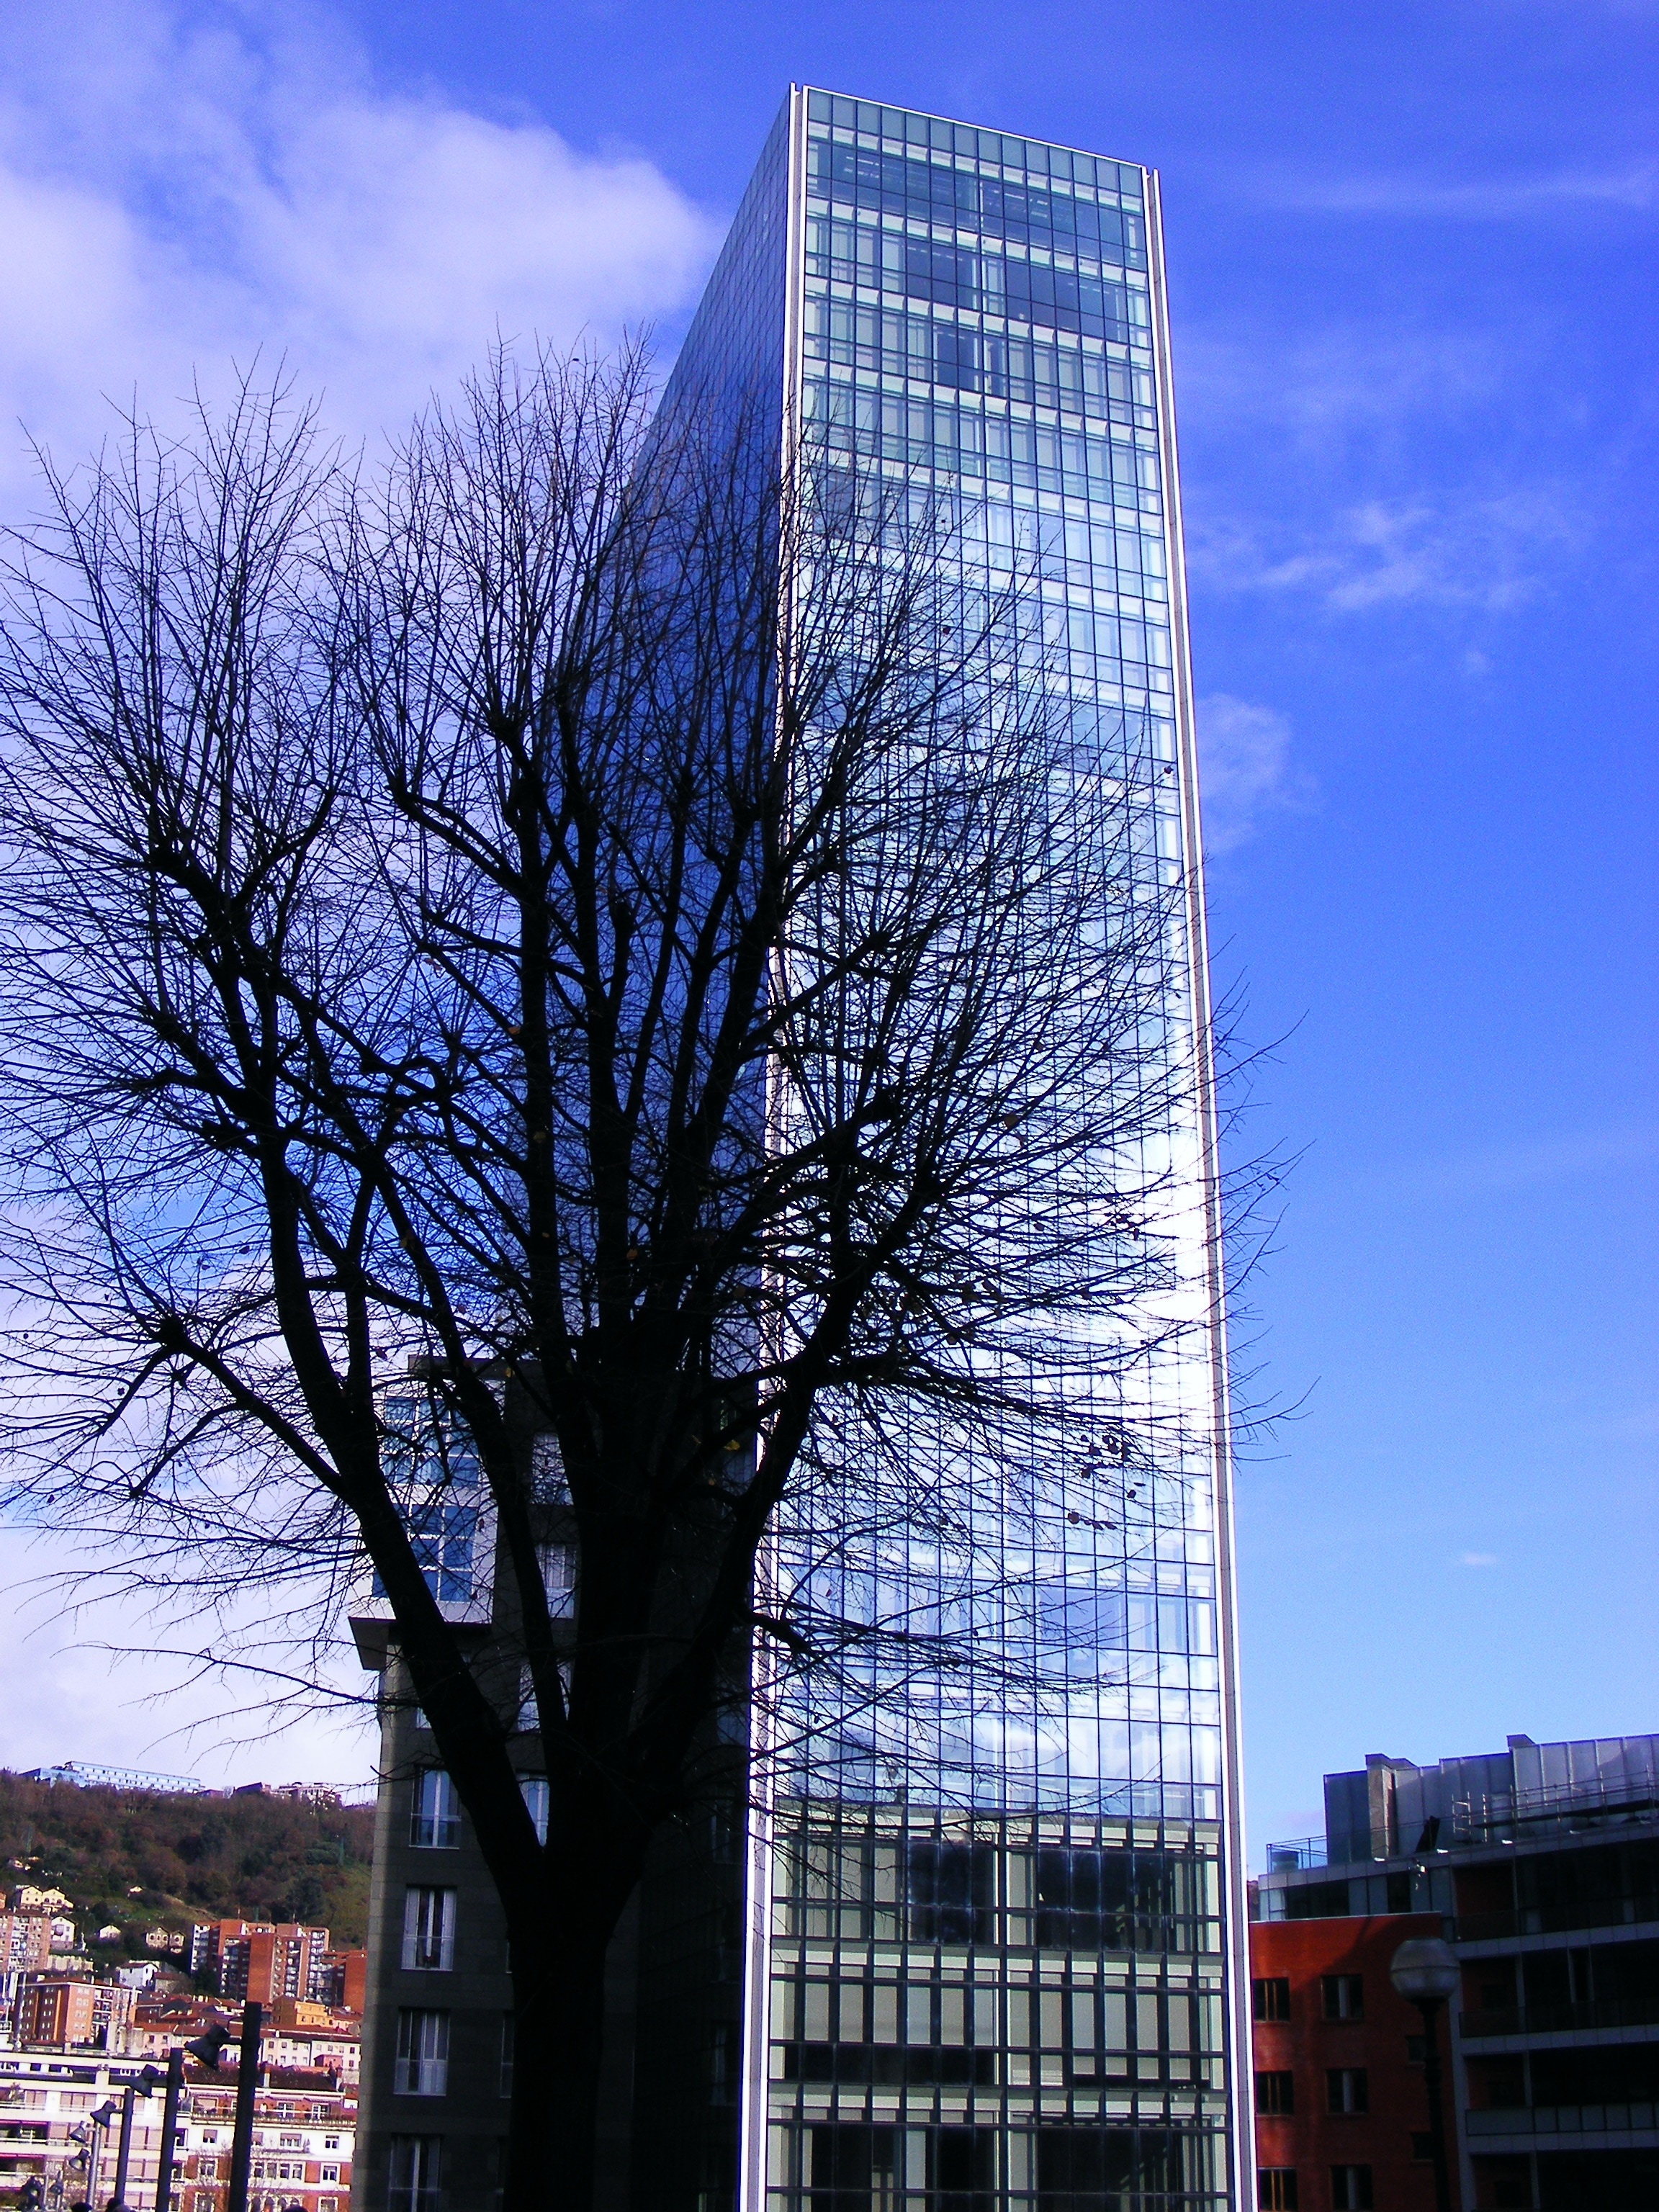 black leafless tree and high rise building